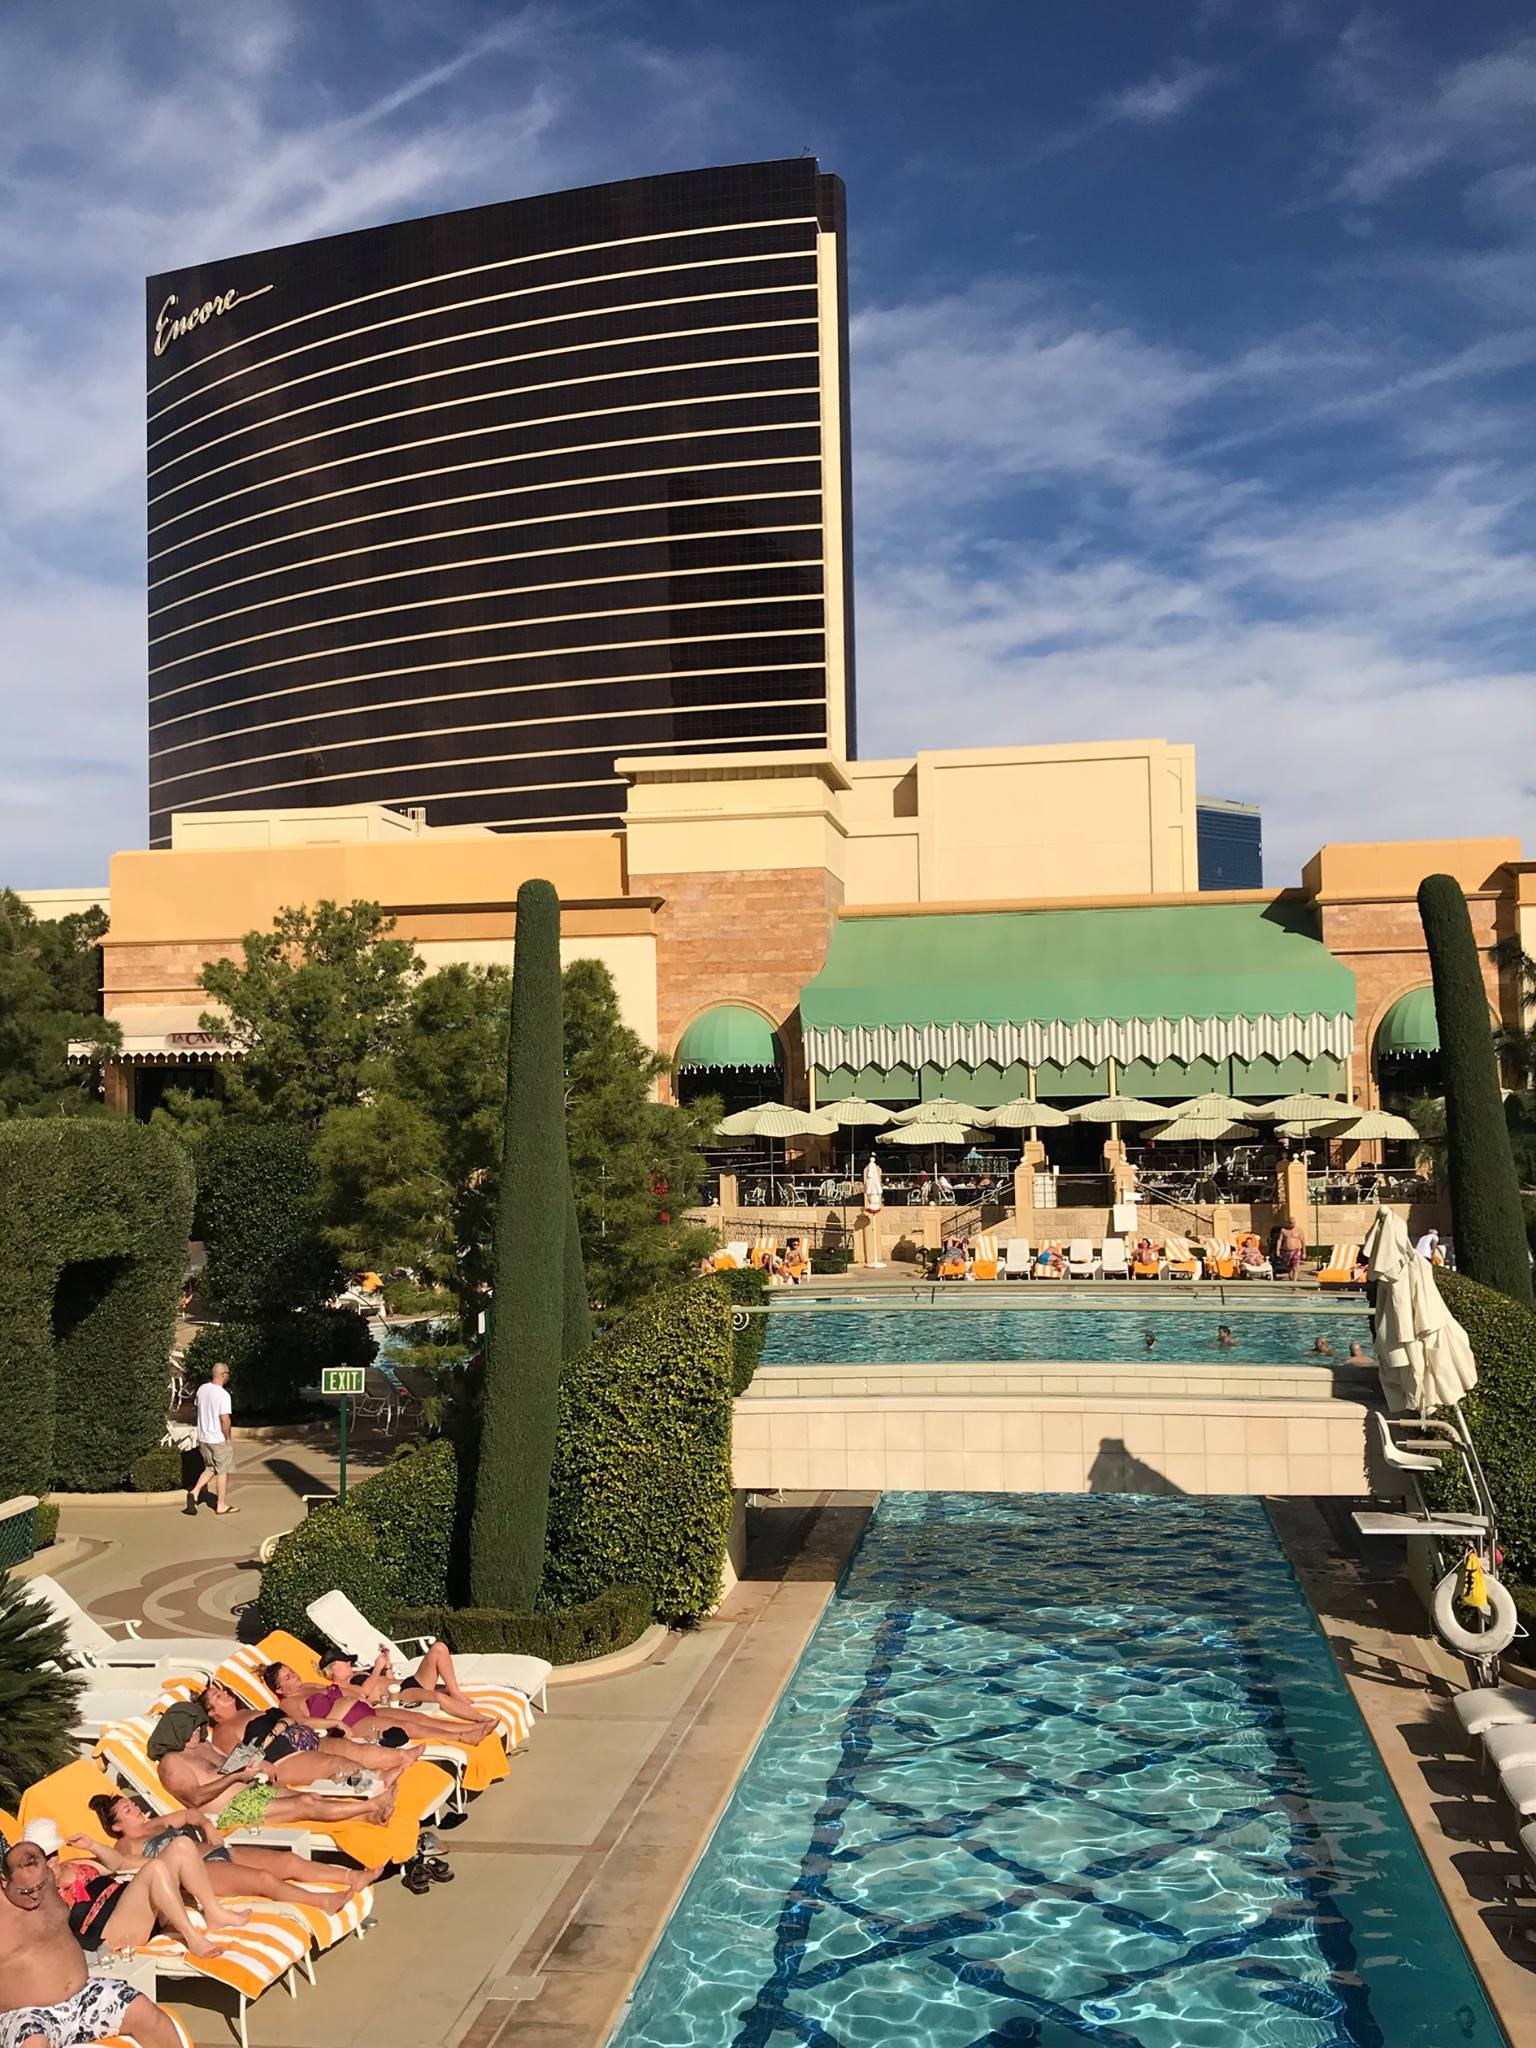 Photograph of Encore hotel and pool